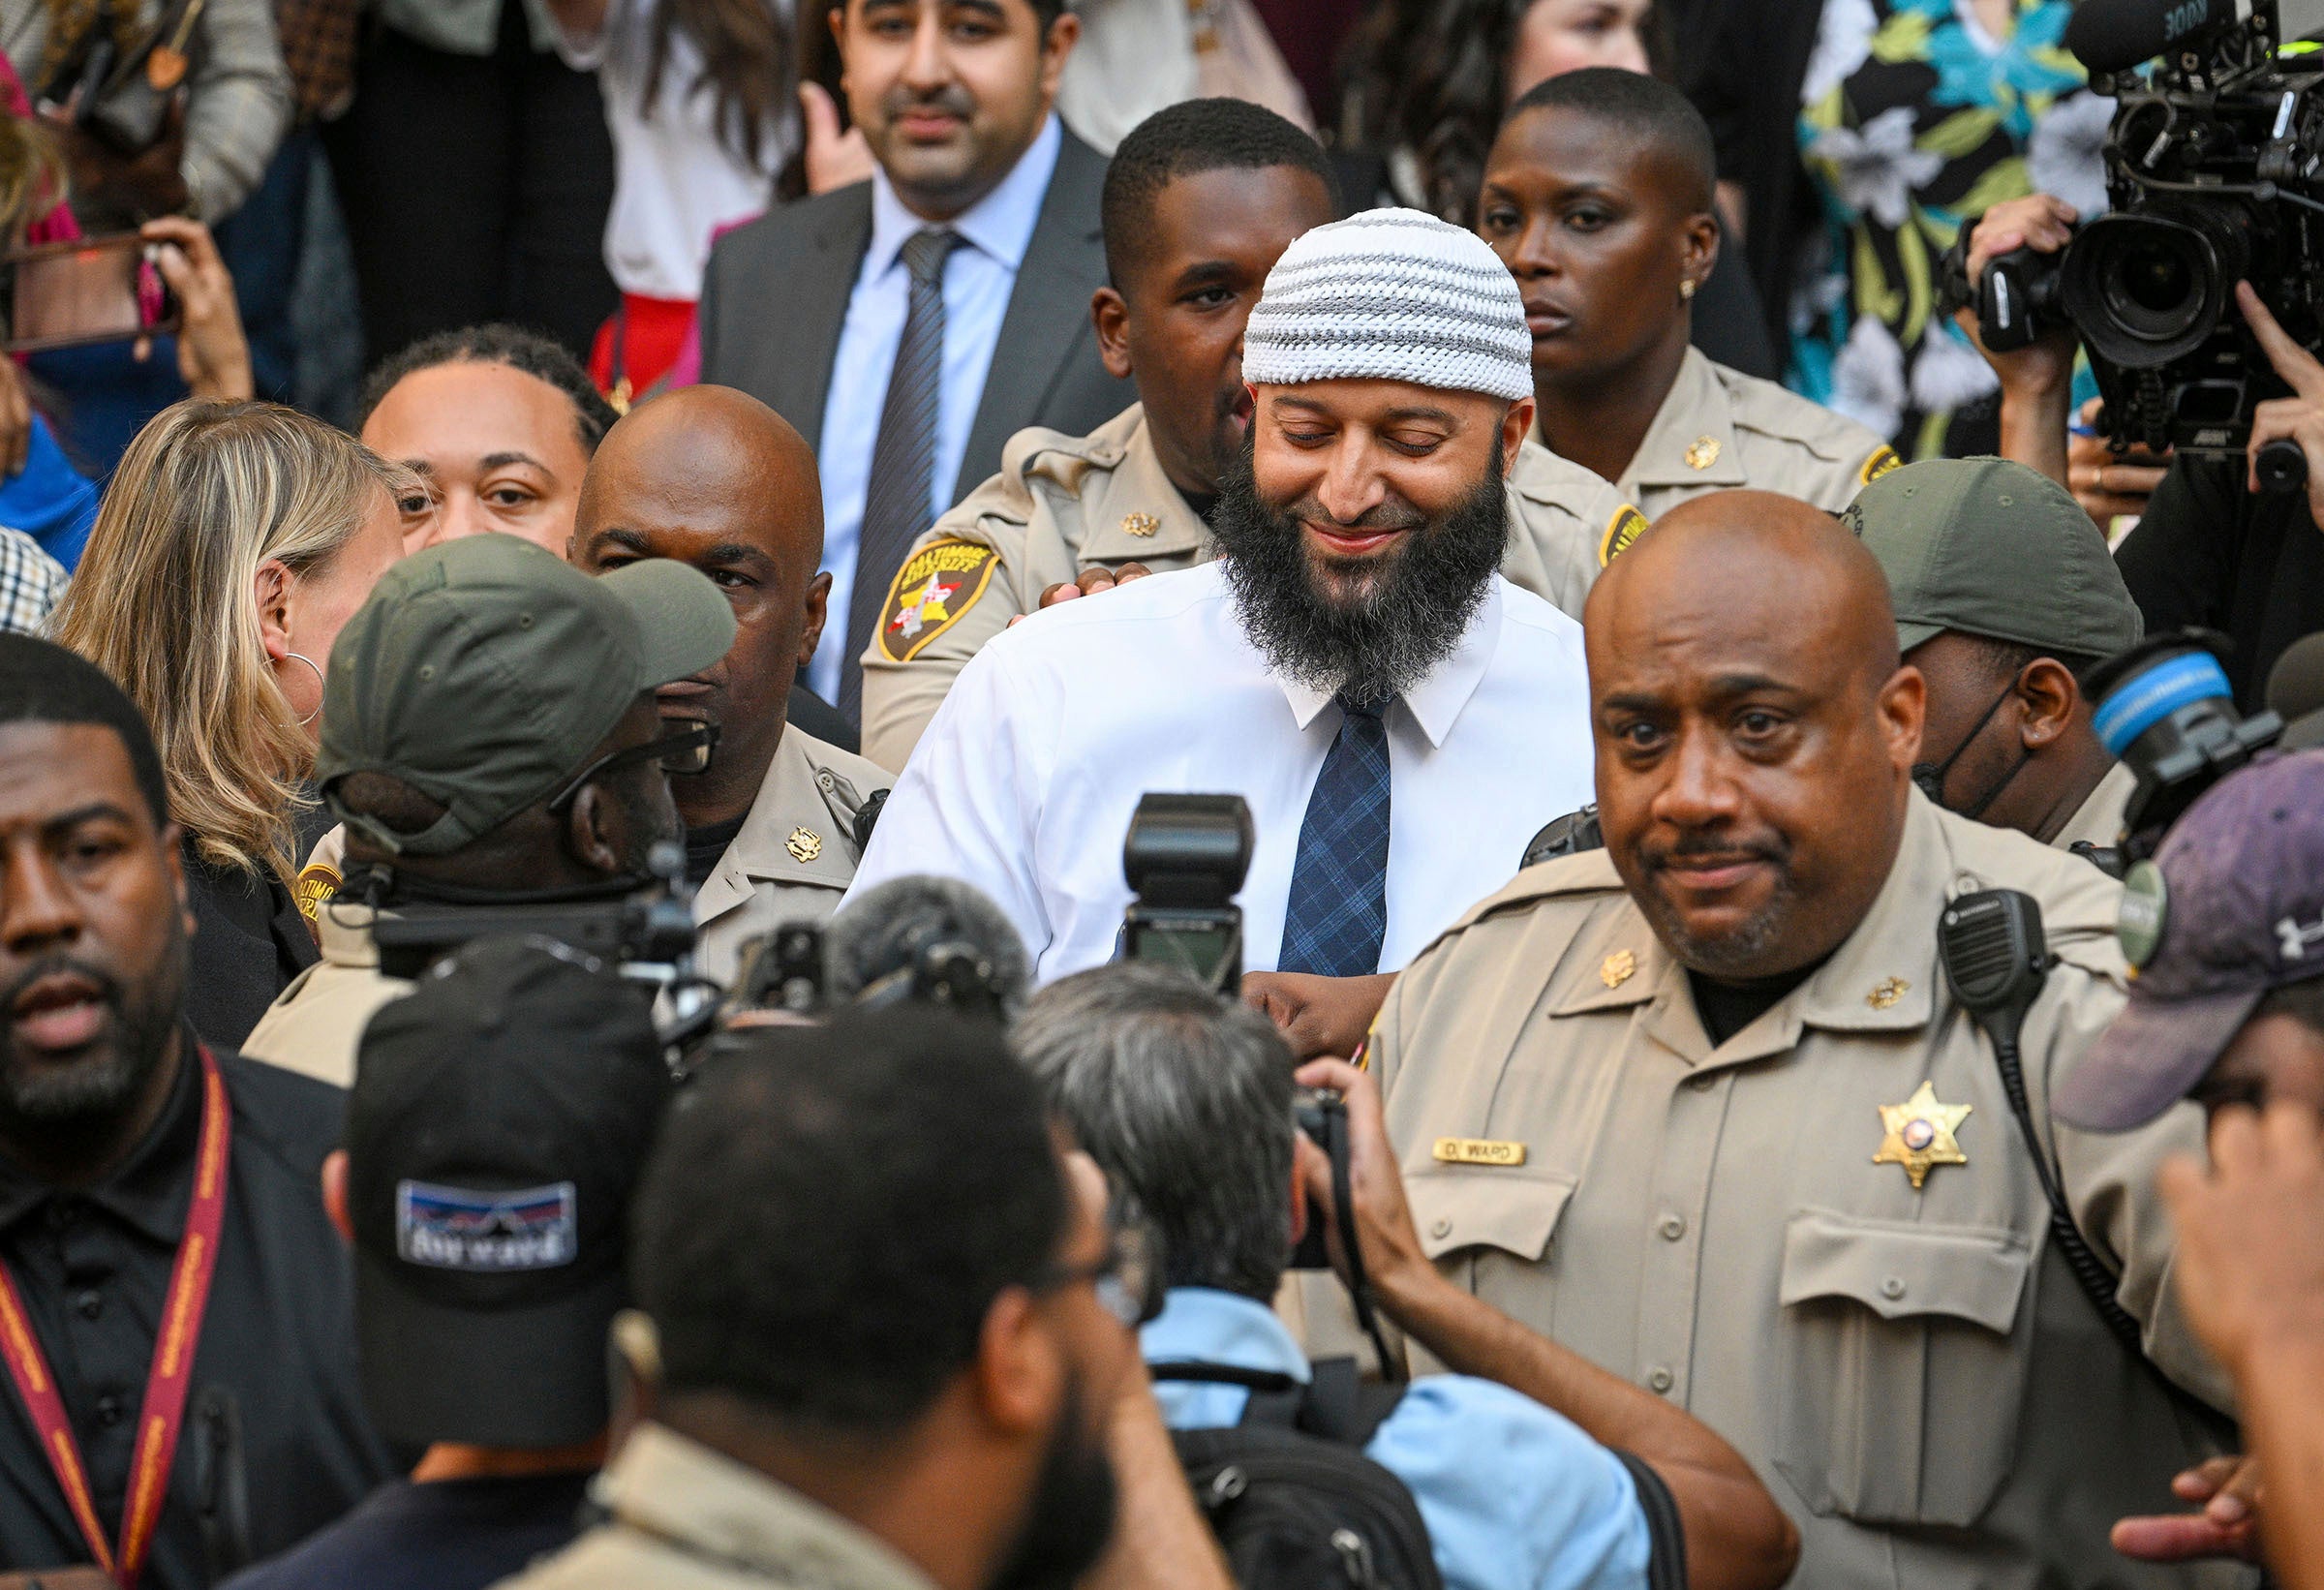 Adnan Syed smiles as he leaves court a free man on Monday